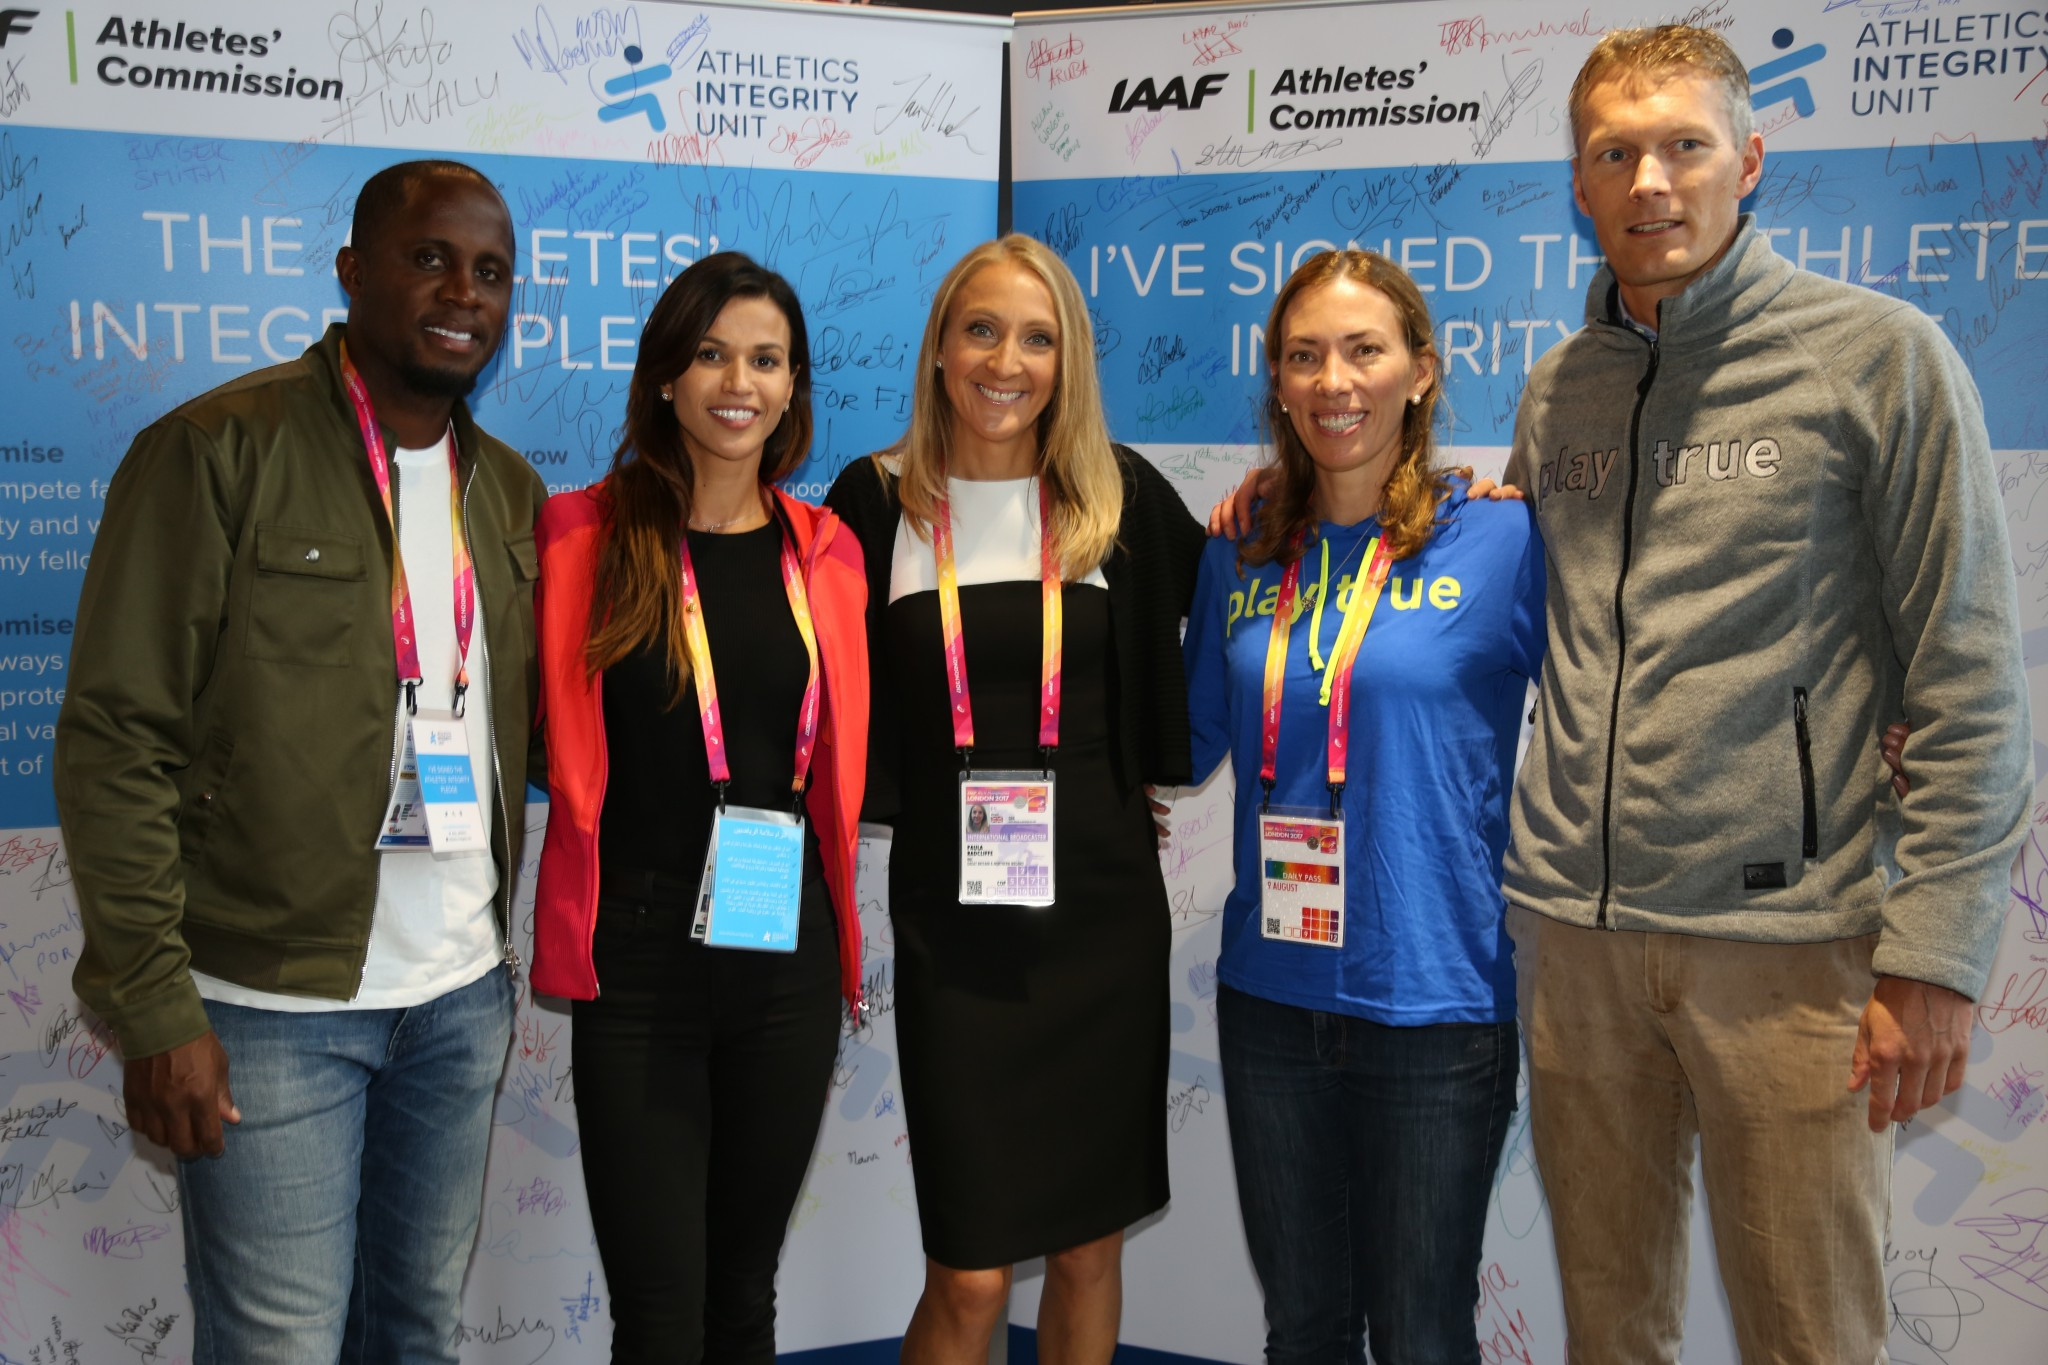 WADA Athlete Committee show support for Athletics Integrity Unit at IAAF World Championships